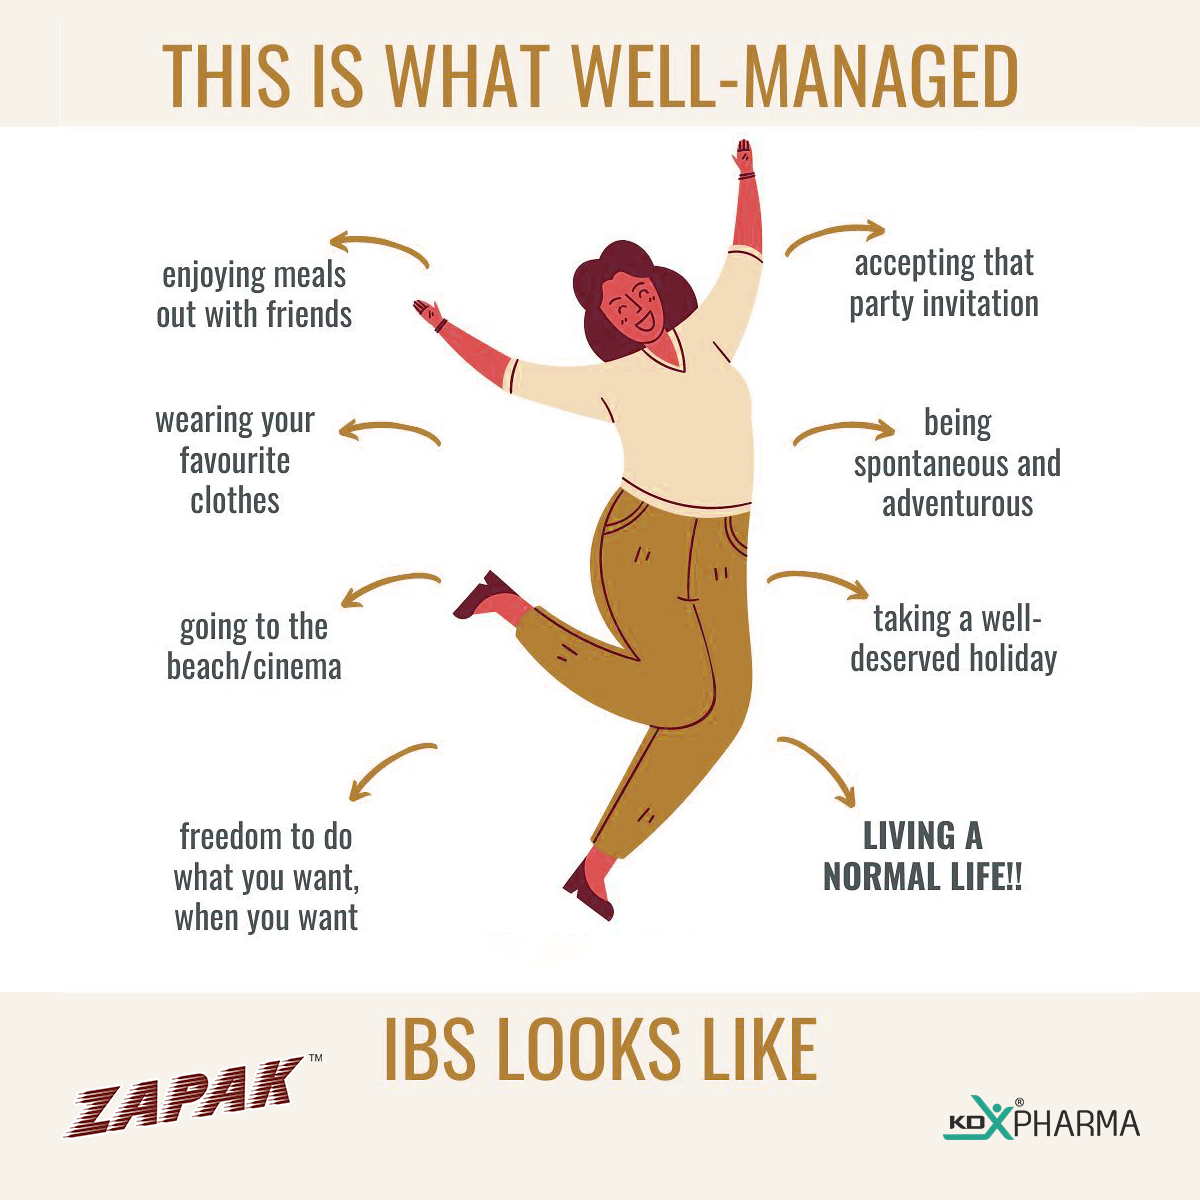 IBS can be managed. Just read the image and do it accordingly.
.
.
.
.
.
#eatingout #favouritecloths #movie #watchingmovies #freedom #party #partytime #spontaneous #holiday #havefun #normal #normalize #VocalForLocal #IndianMedicine #constipationproblems #zapaksesaaf #zapakchurna